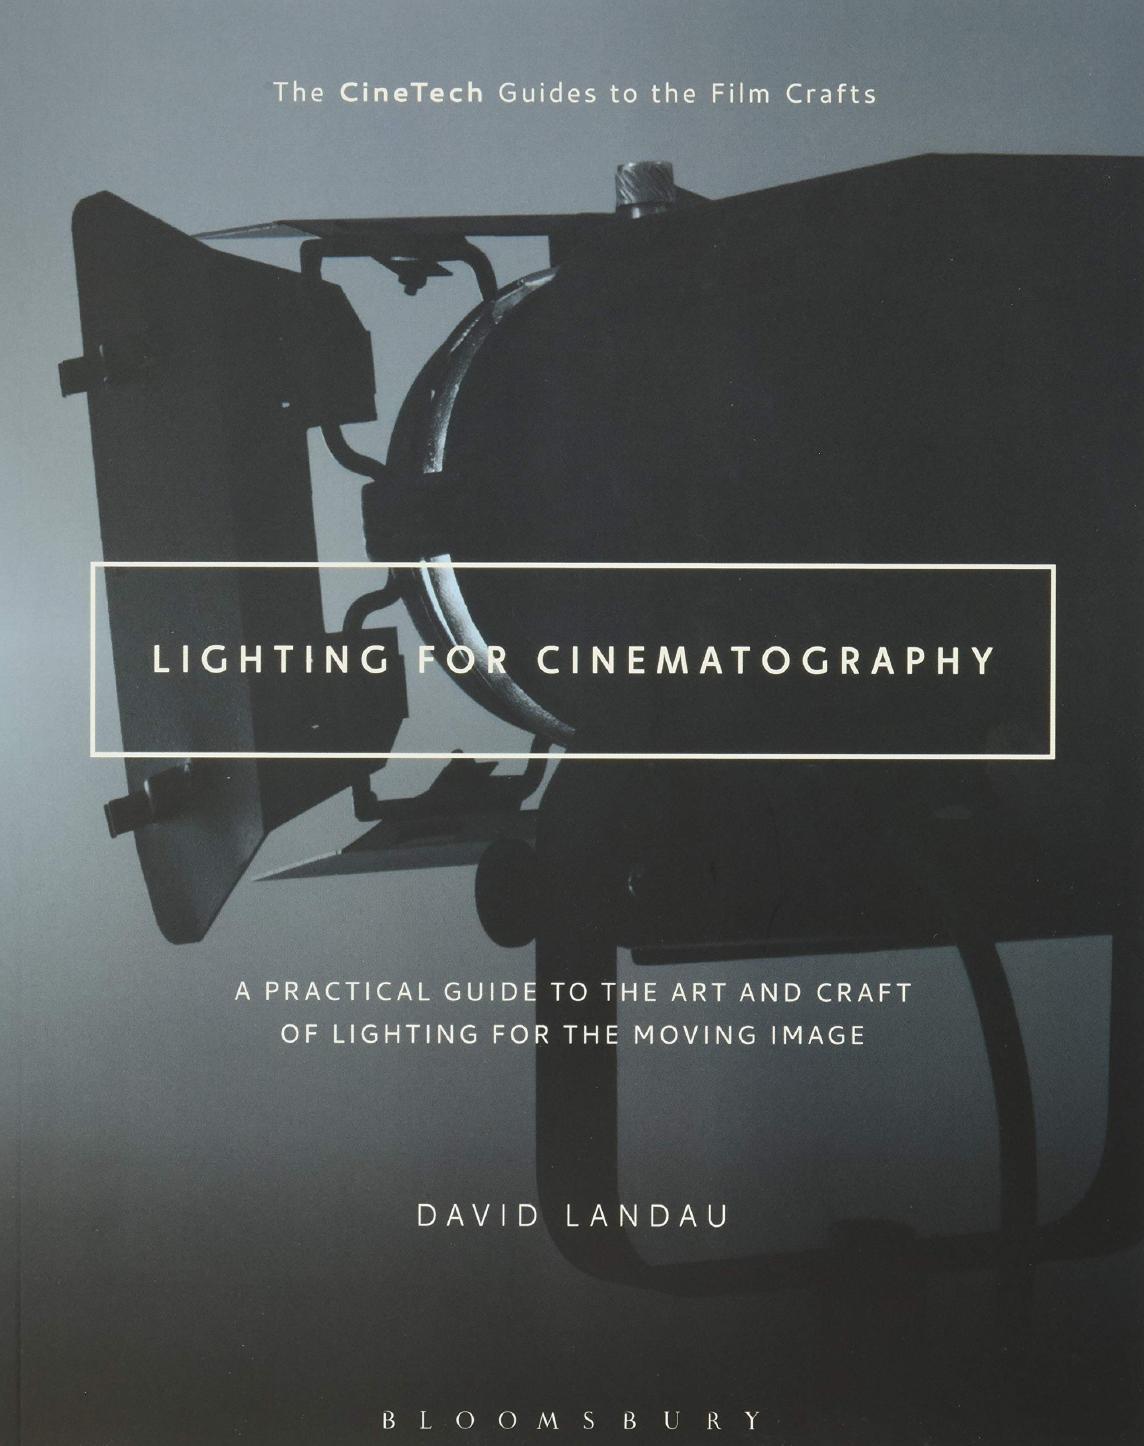 Lighting for Cinematography A Practical Guide to the Art and Craft of Lighting for the Moving Image  by David Landau